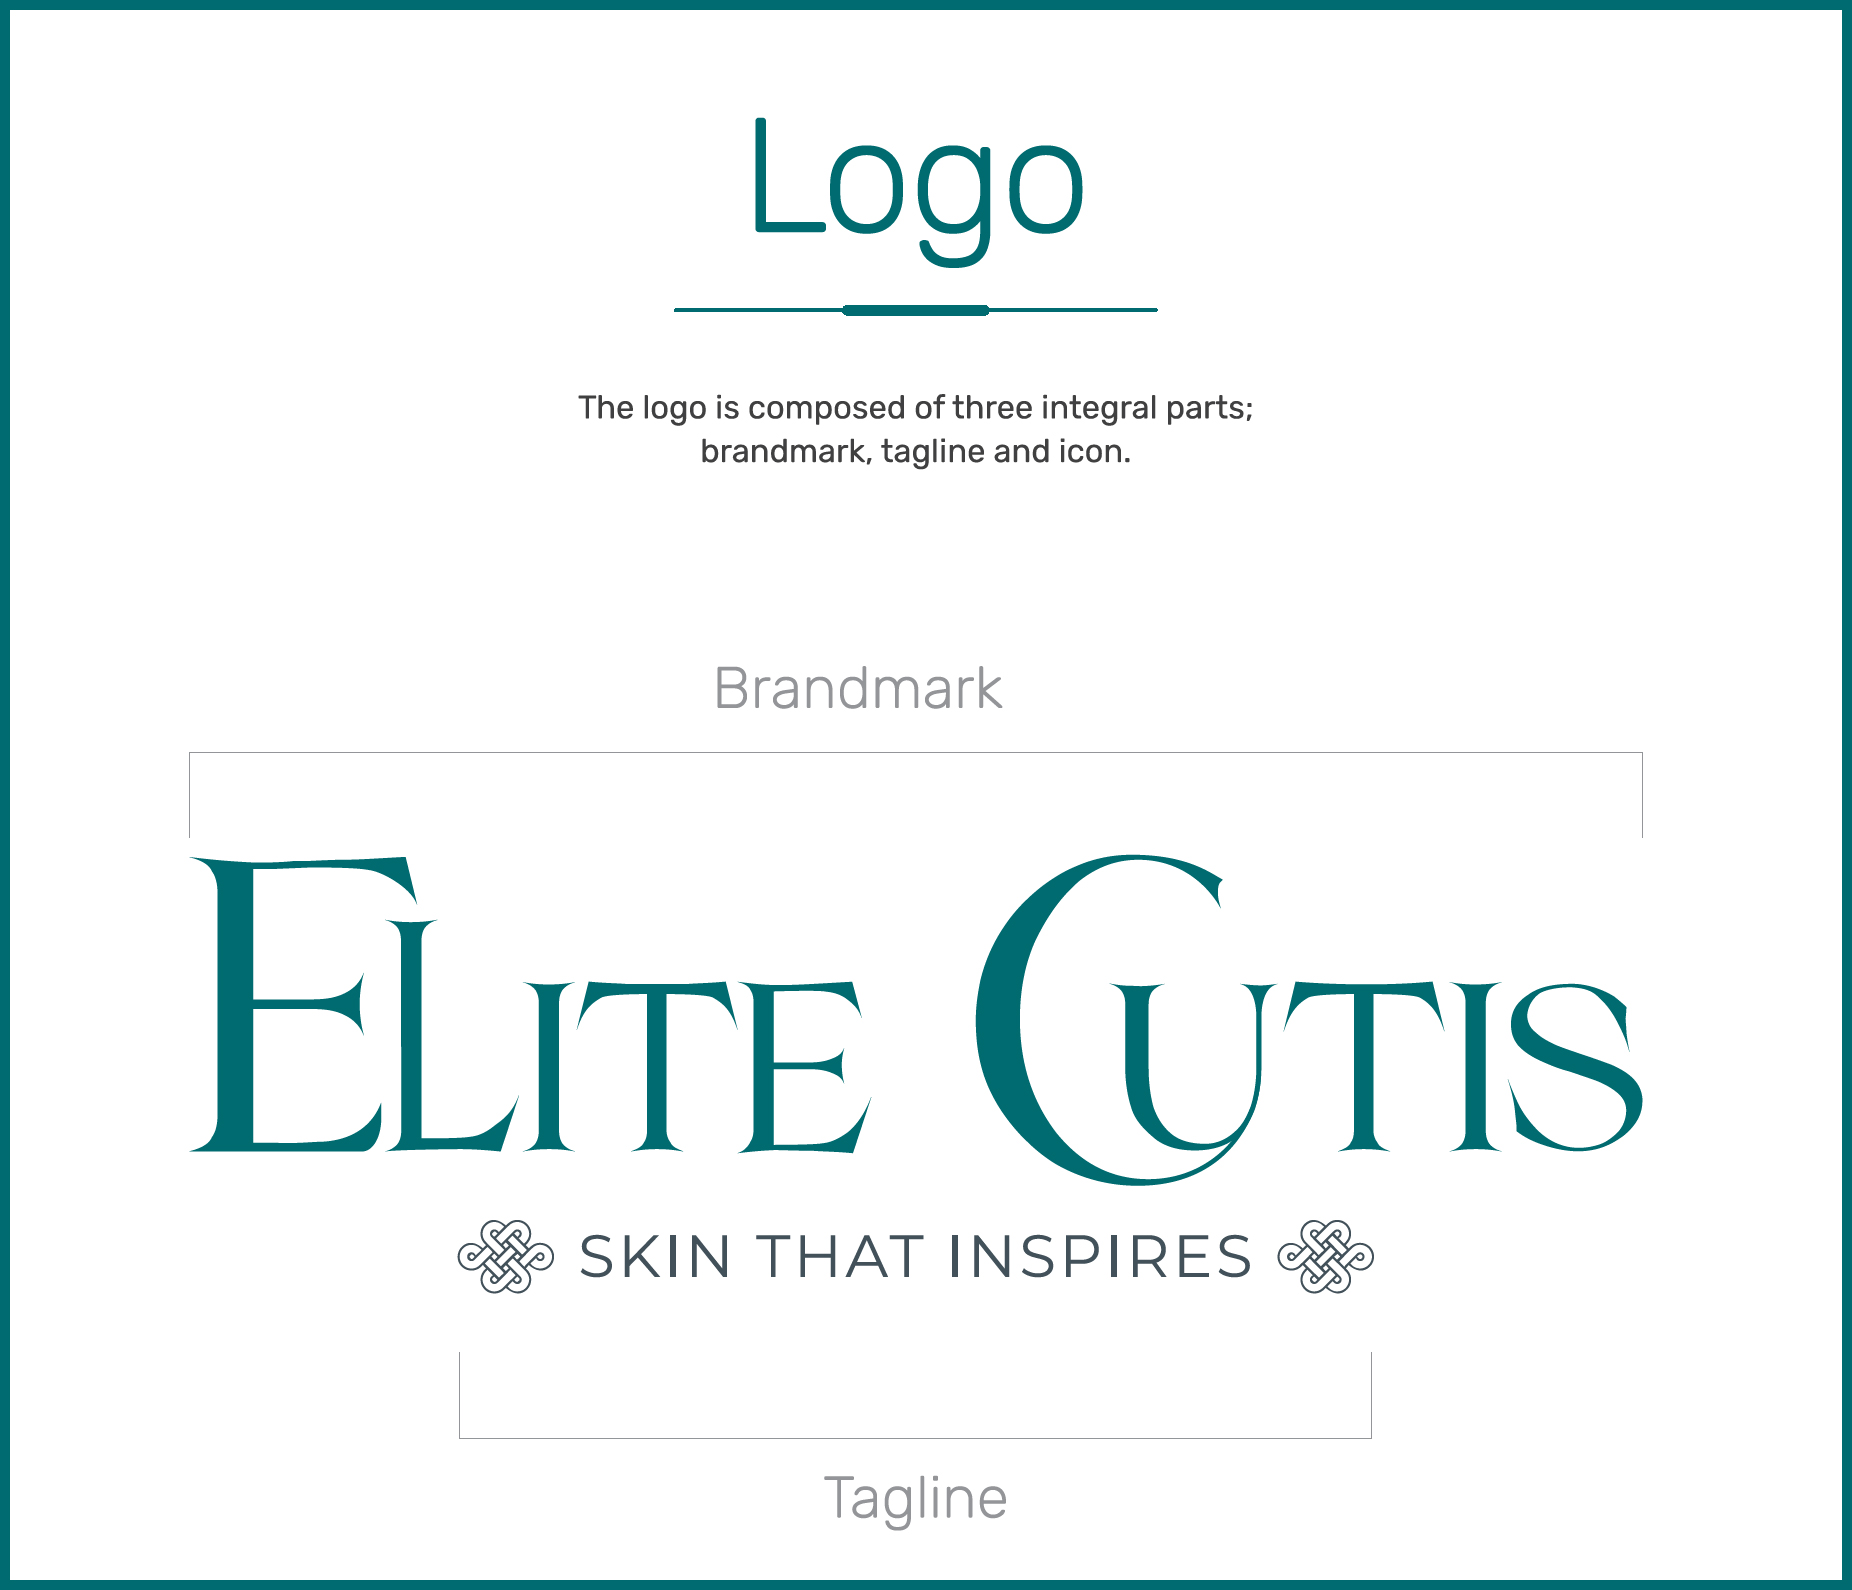 <h5></h5>
<h5 style="text-align: center;"><strong>ELITE CUTIS</strong><br />
(Cosmetic Clinic)</h5>
